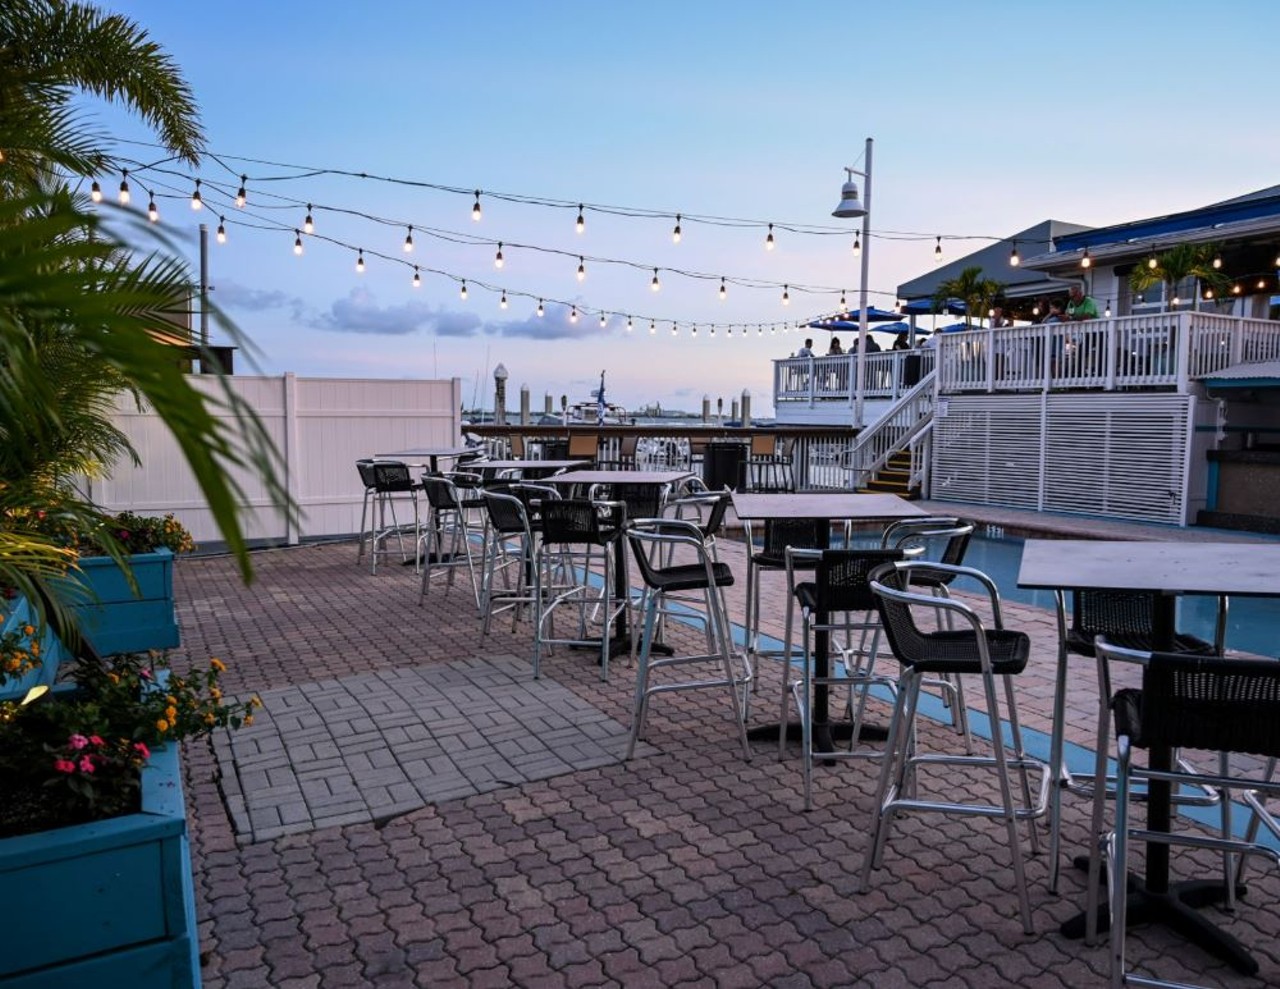 Hula Bay Club
5210 W Tyson Ave., Tampa (813) 837-4852
Nestled along Tampa Bay’s waterfront, Hula Bay offers brunch, crafted cocktails and views that almost make you feel like you're on a tropical island. The casual menu features everything from sushi, burgers, bowls, and tacos.
Photo via Hula Bay Club